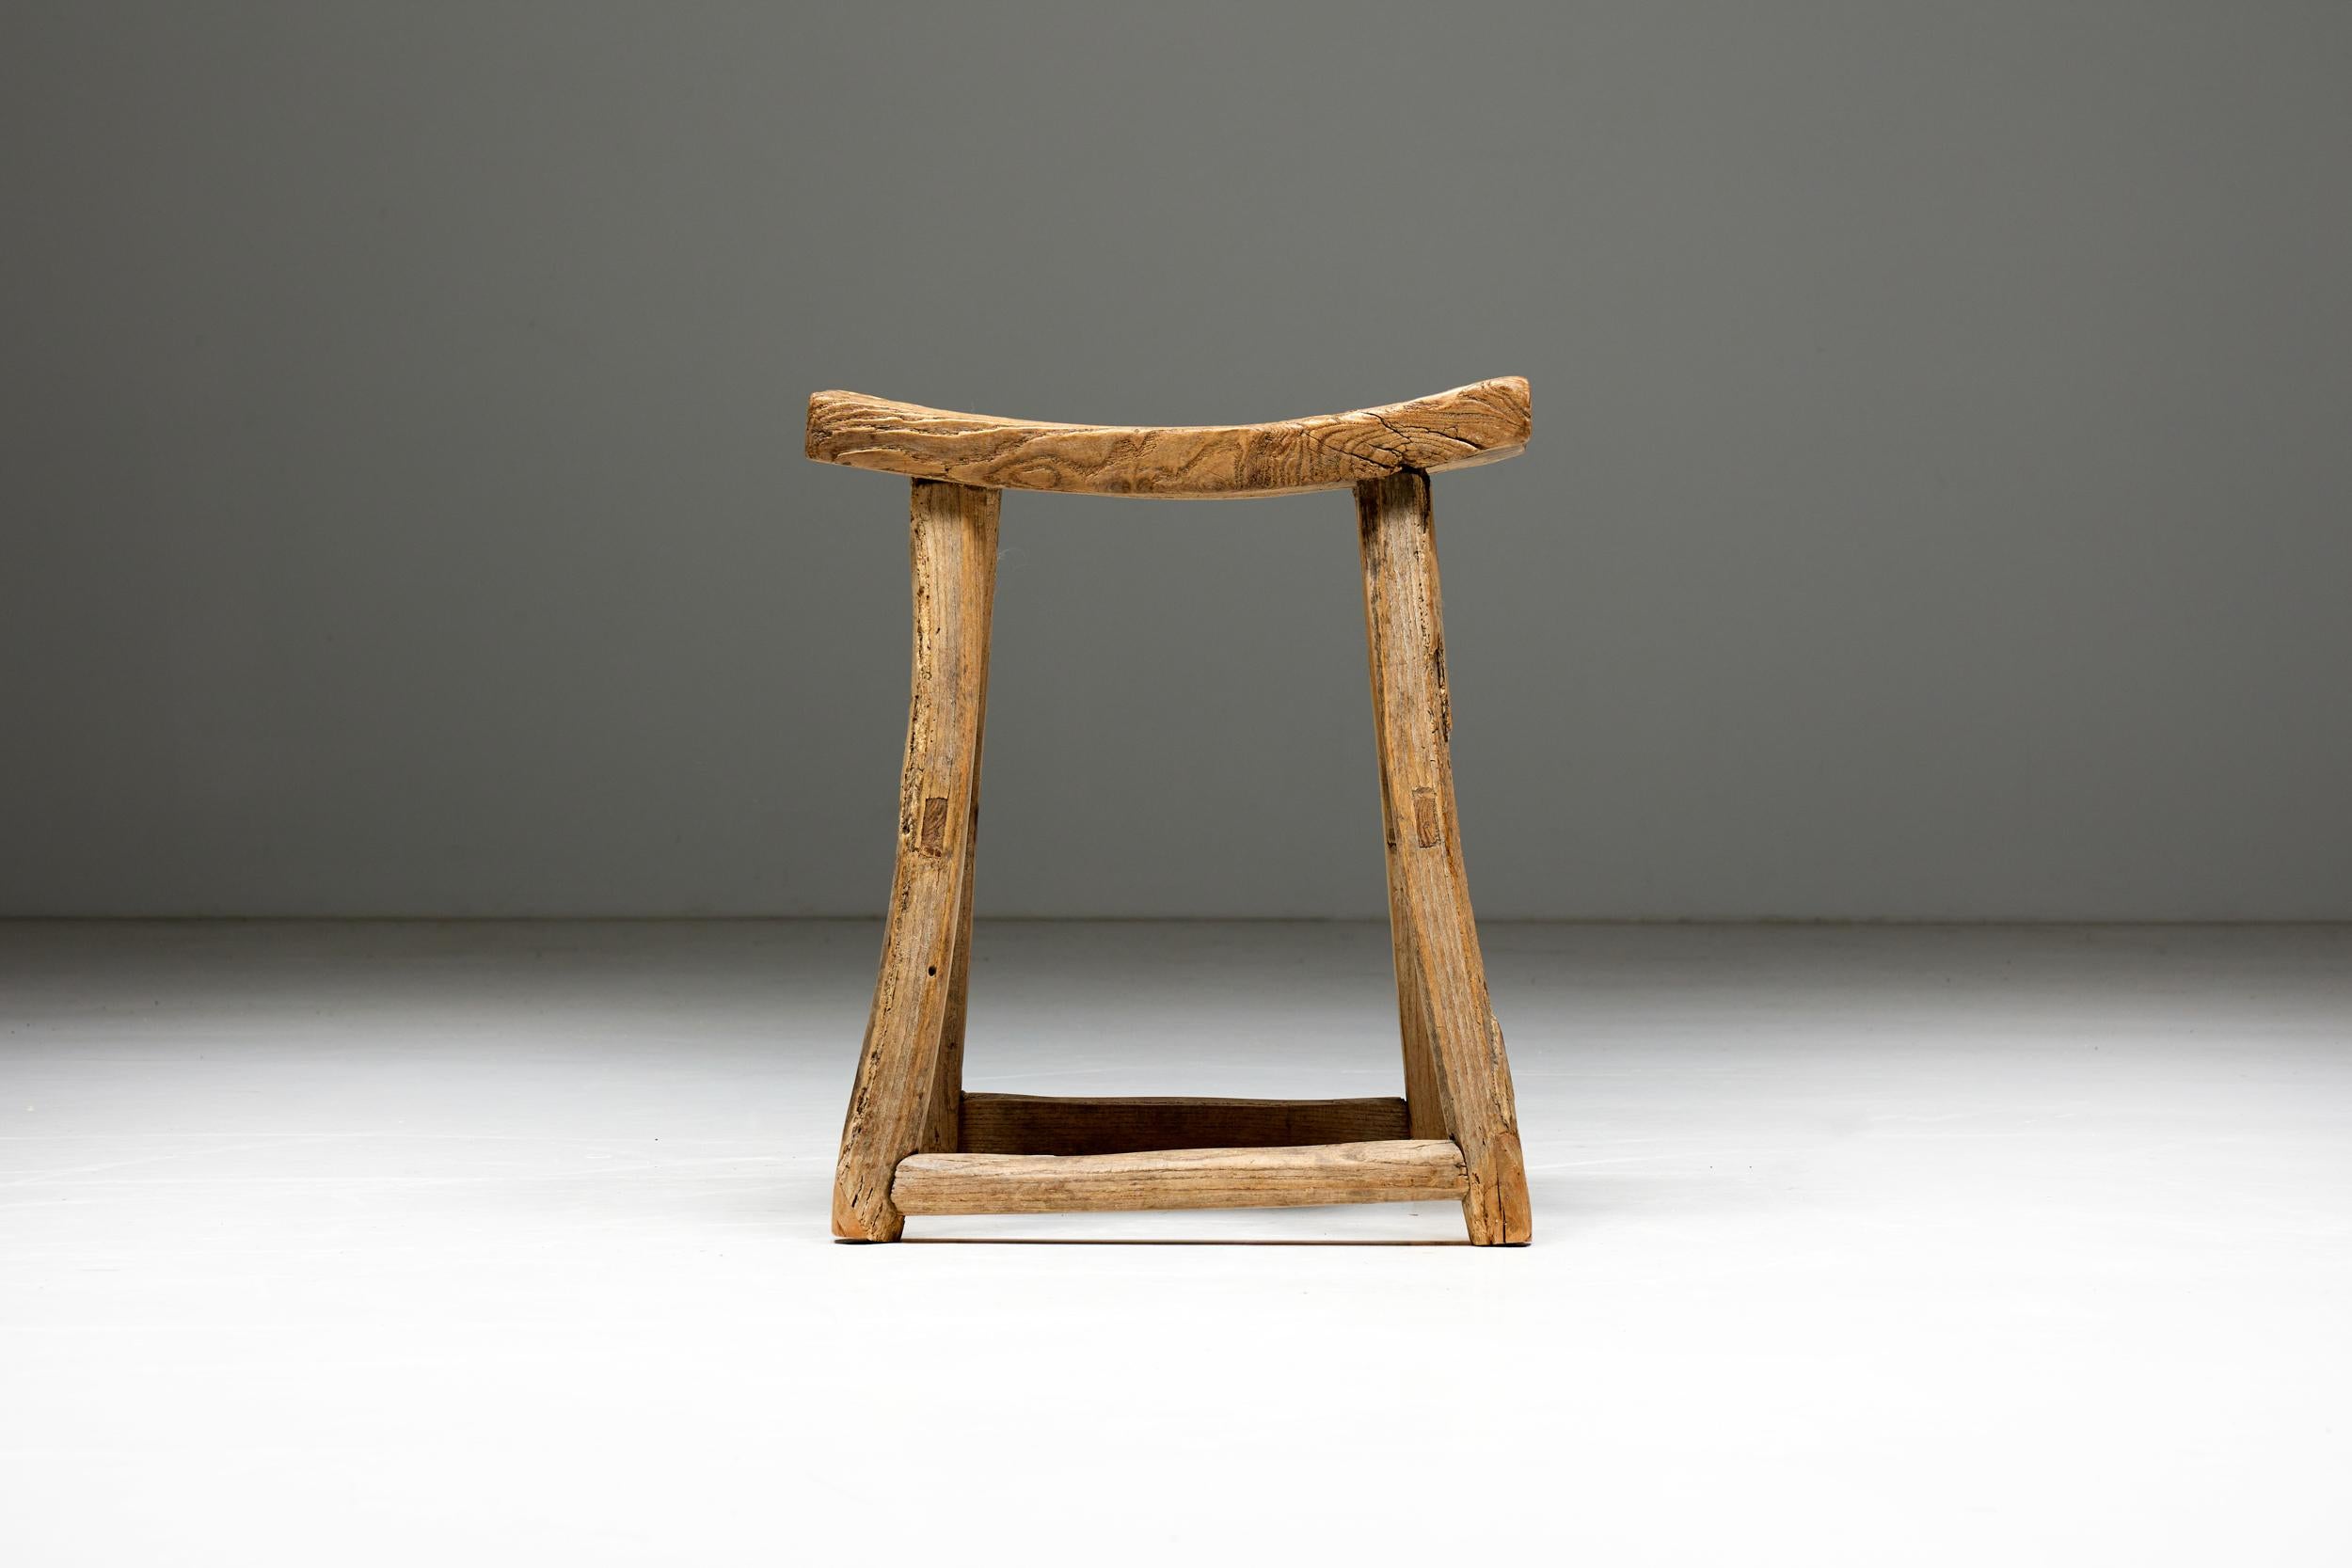 Rustic Folk Art Stool, France, Early 20th Century For Sale 1